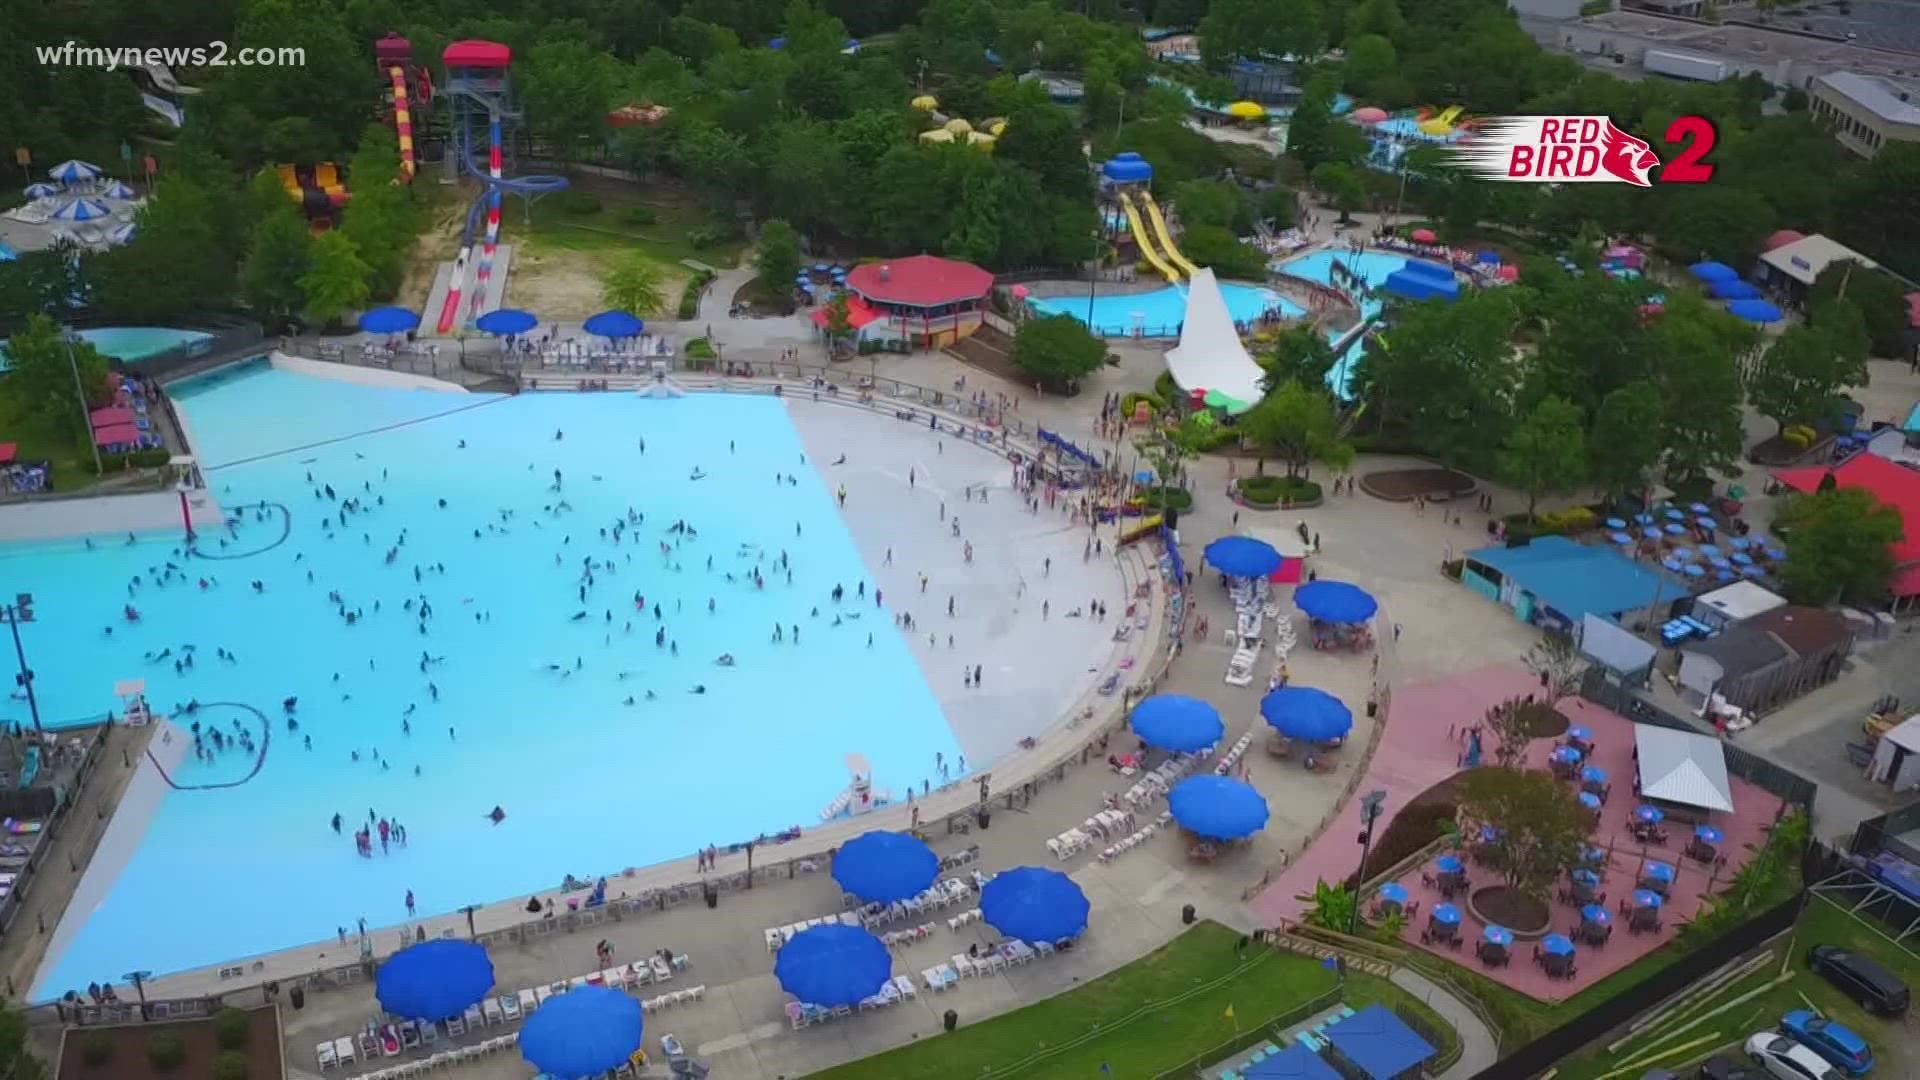 Wet 'N Wild Emerald Pointe in Greensboro is looking to fill more than 600 seasonal jobs.